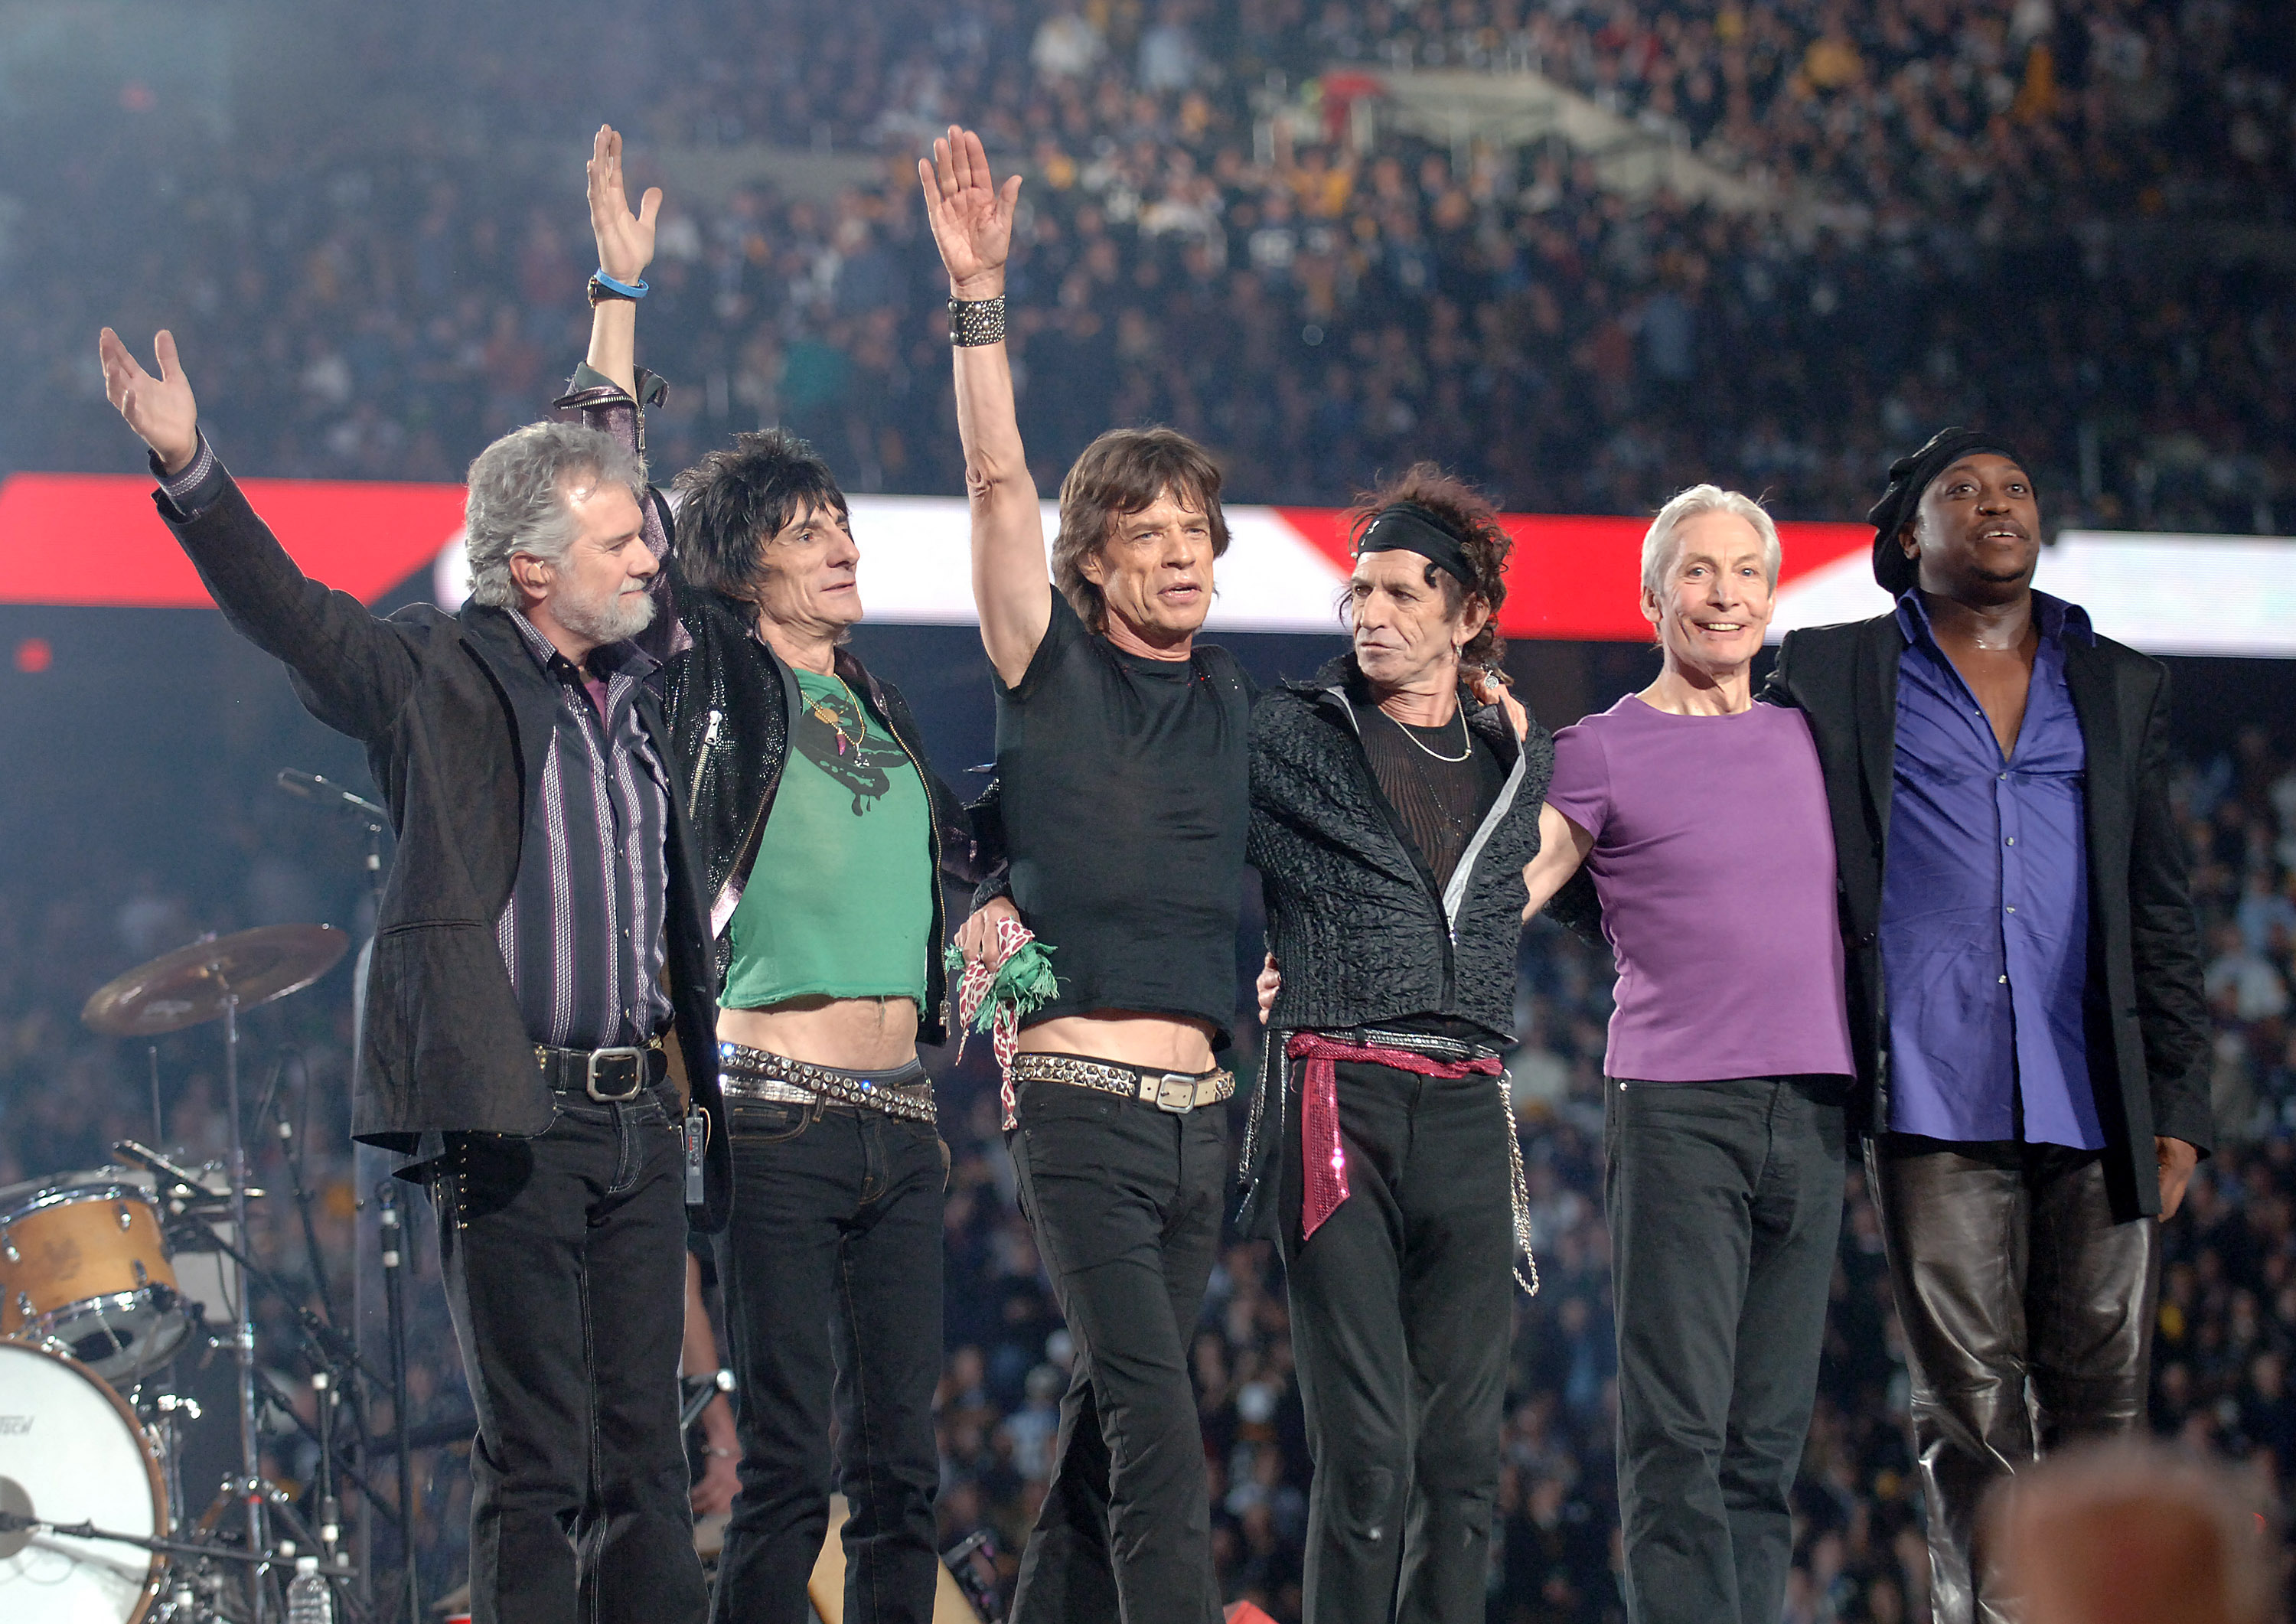 From left: Chuck Leavell, Ron Wood, Mick Jagger, Keith Richards, Charlie Watts, and Darryl Jones of the Rolling Stones perform during Super Bowl XL in Detroit, Mich. on Feb. 5, 2006.